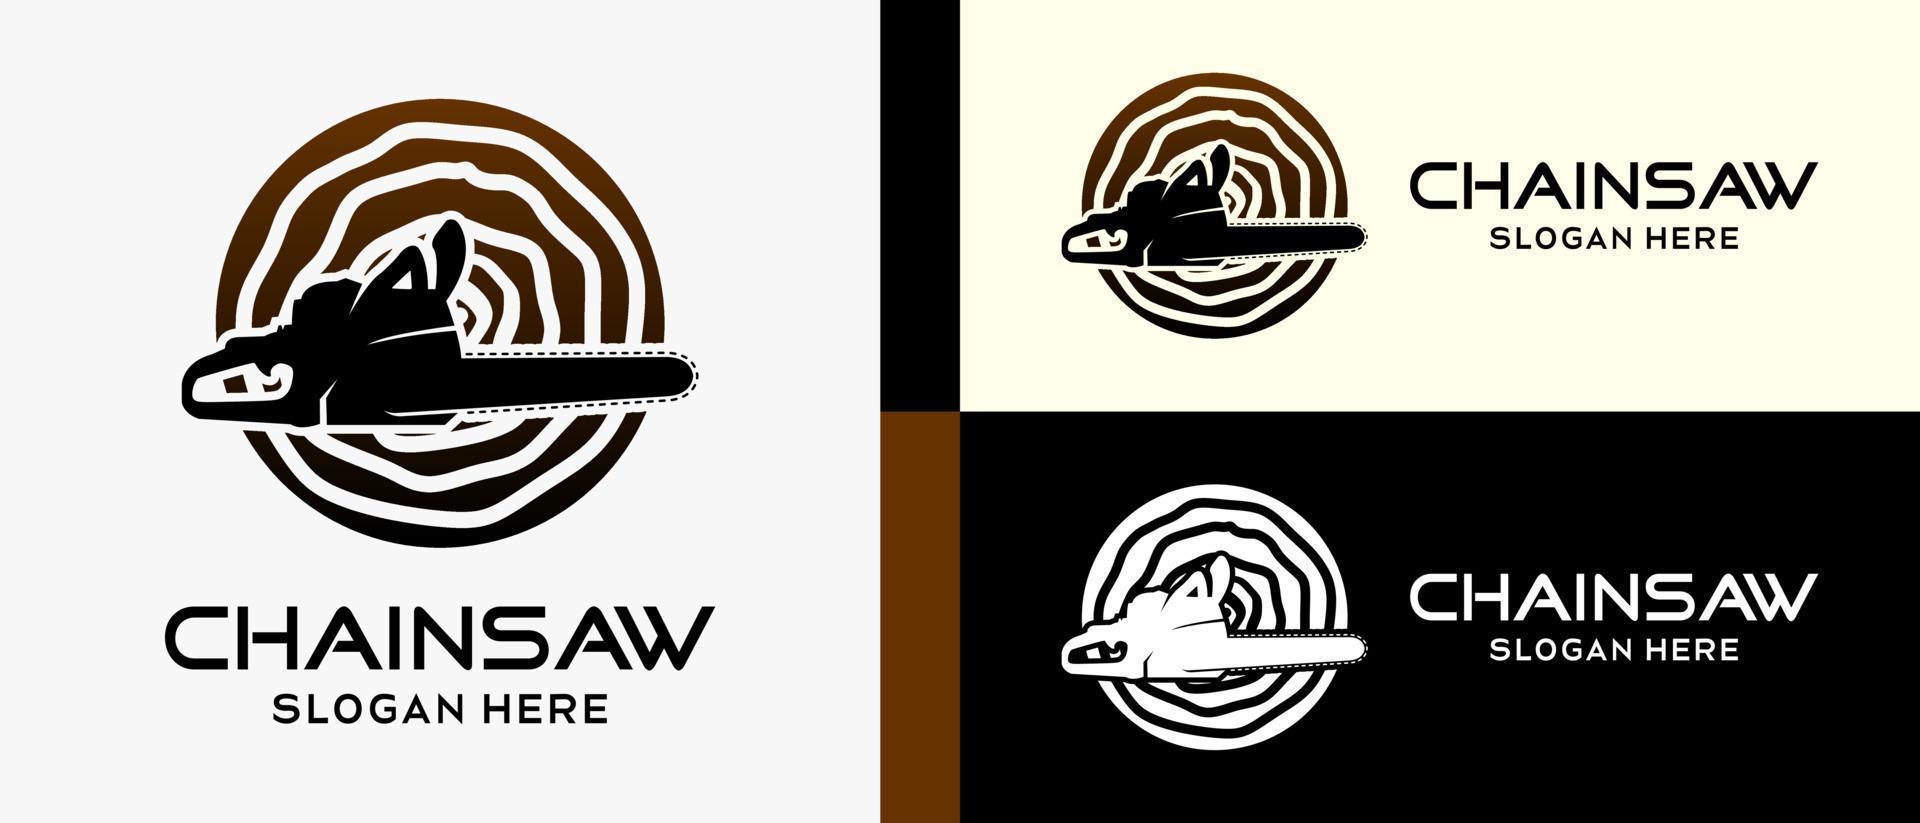 chainsaw logo design template in silhouette with creative concept isolated in wood motif. premium vector logo illustration